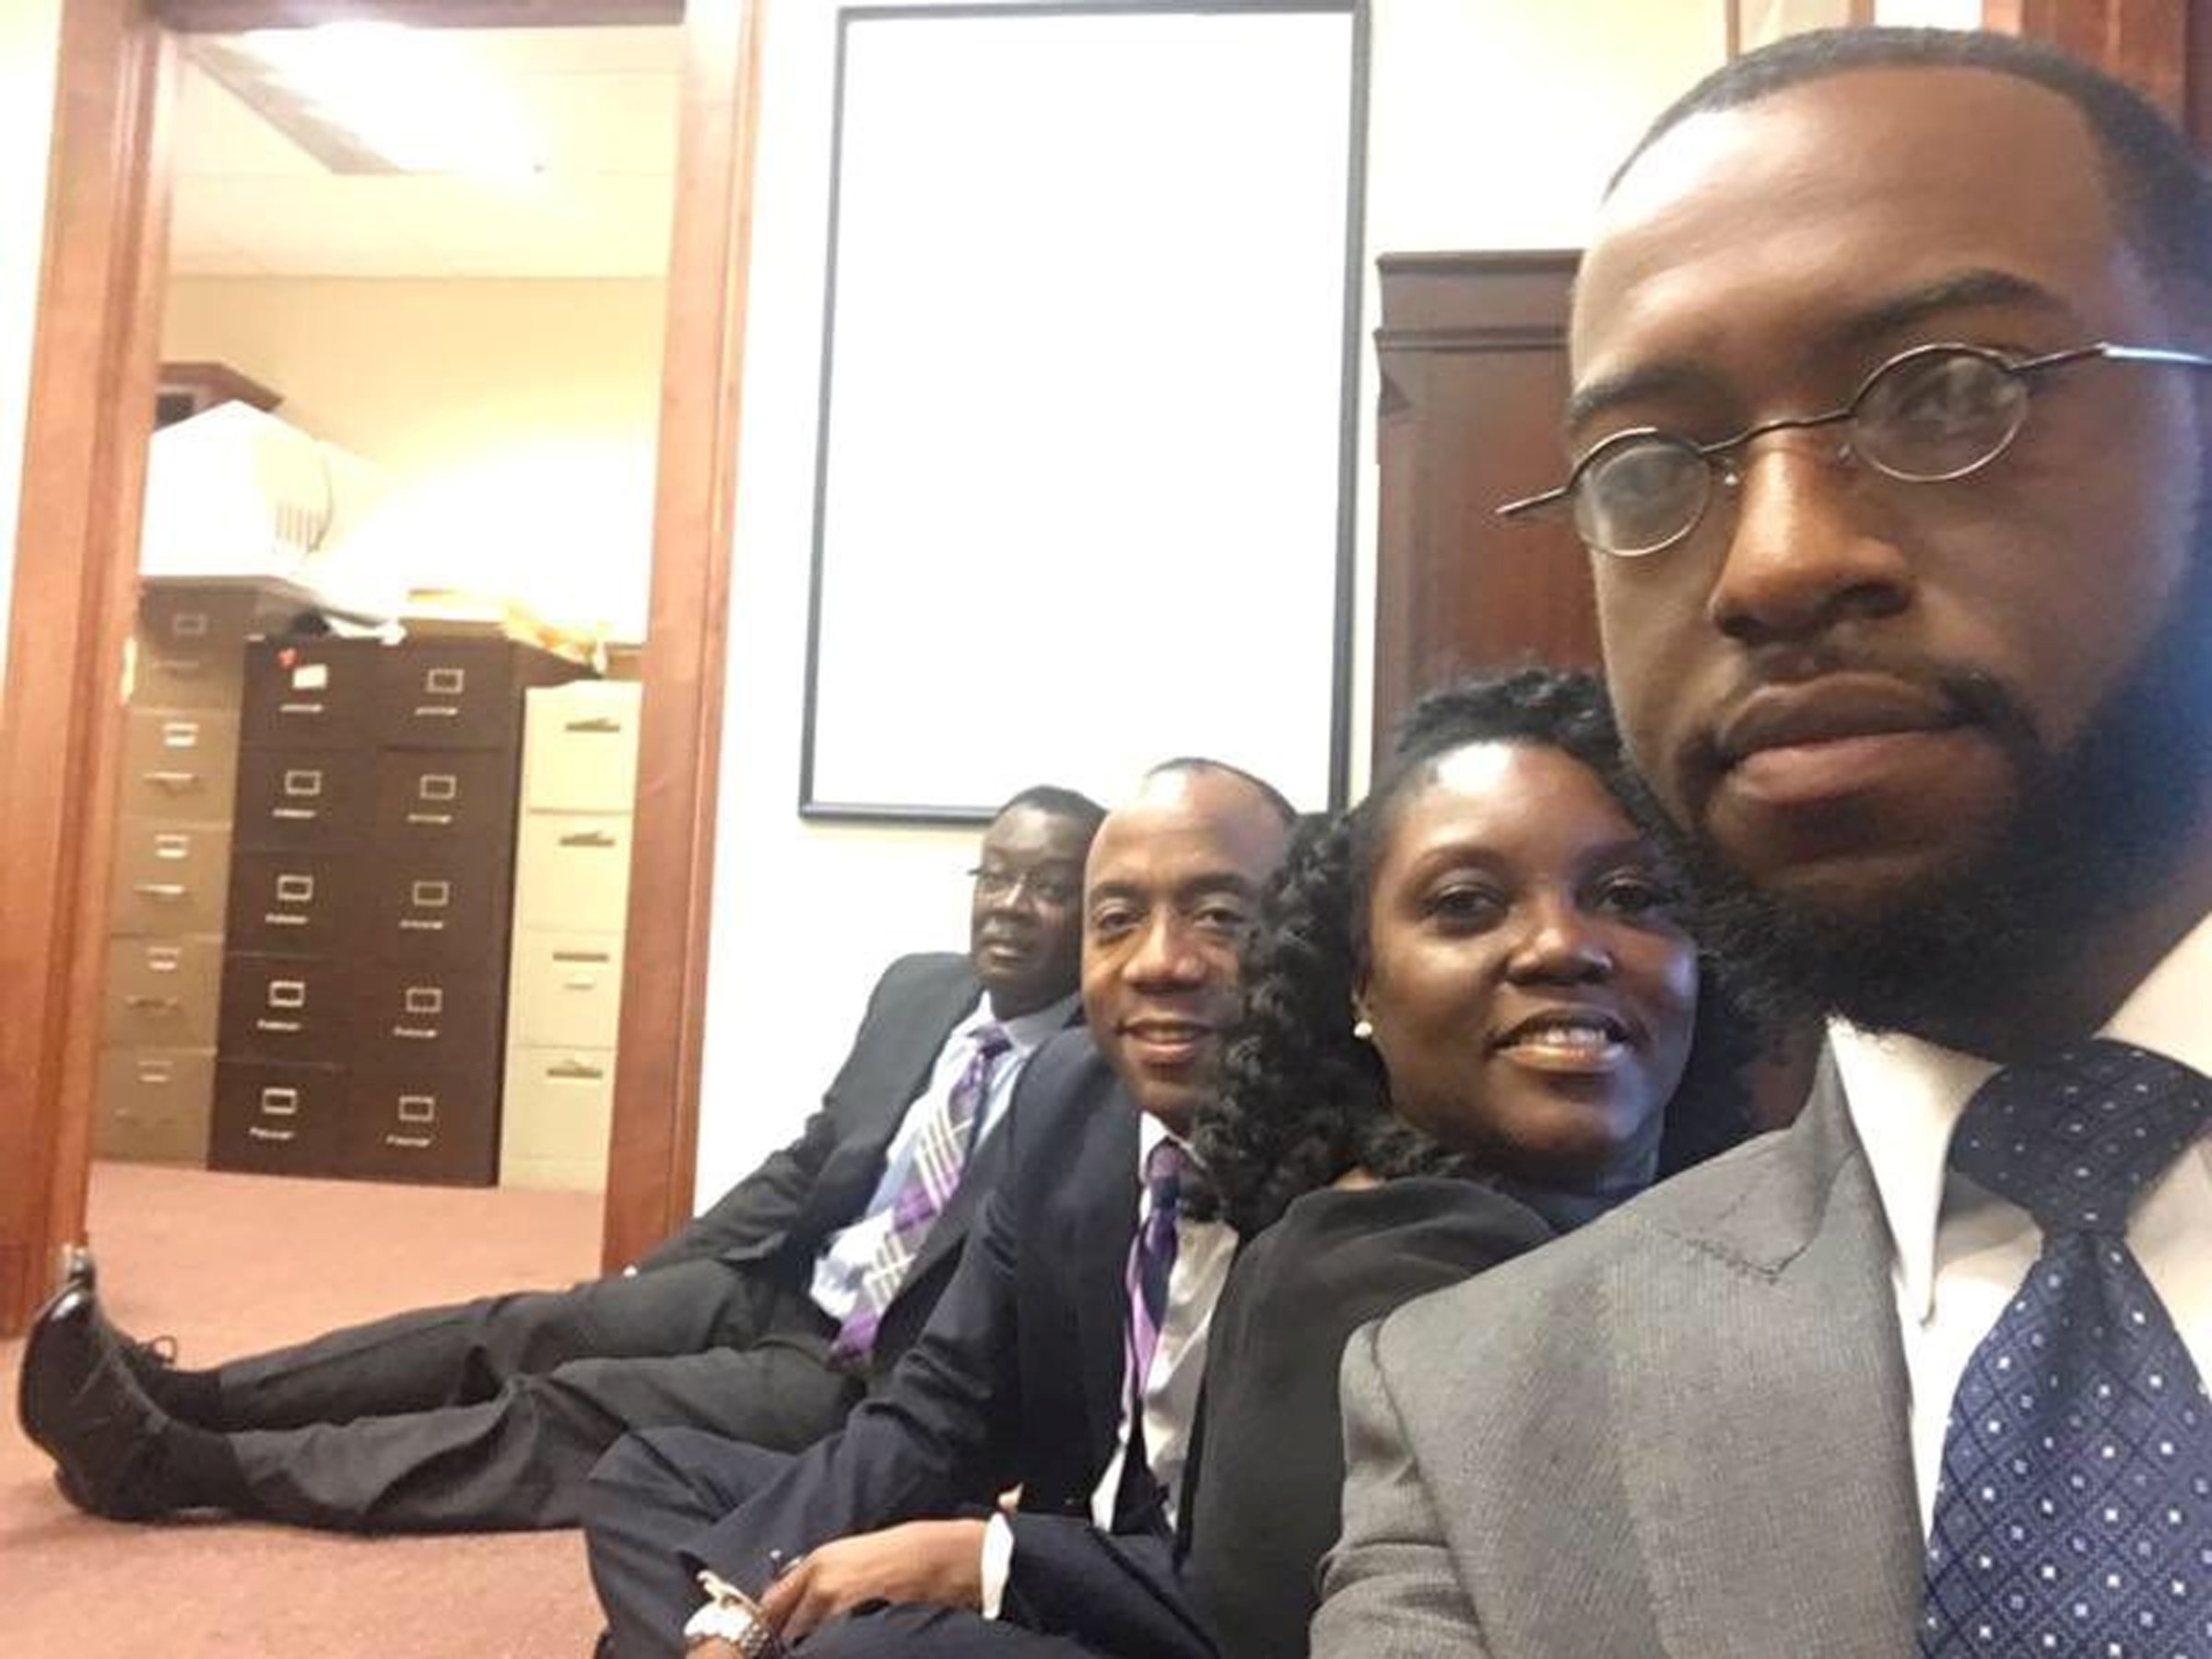 NAACP's Simelton, Brooks and Crawford occupy the mobile office of Jeff Sessions in Mobile, Alabama